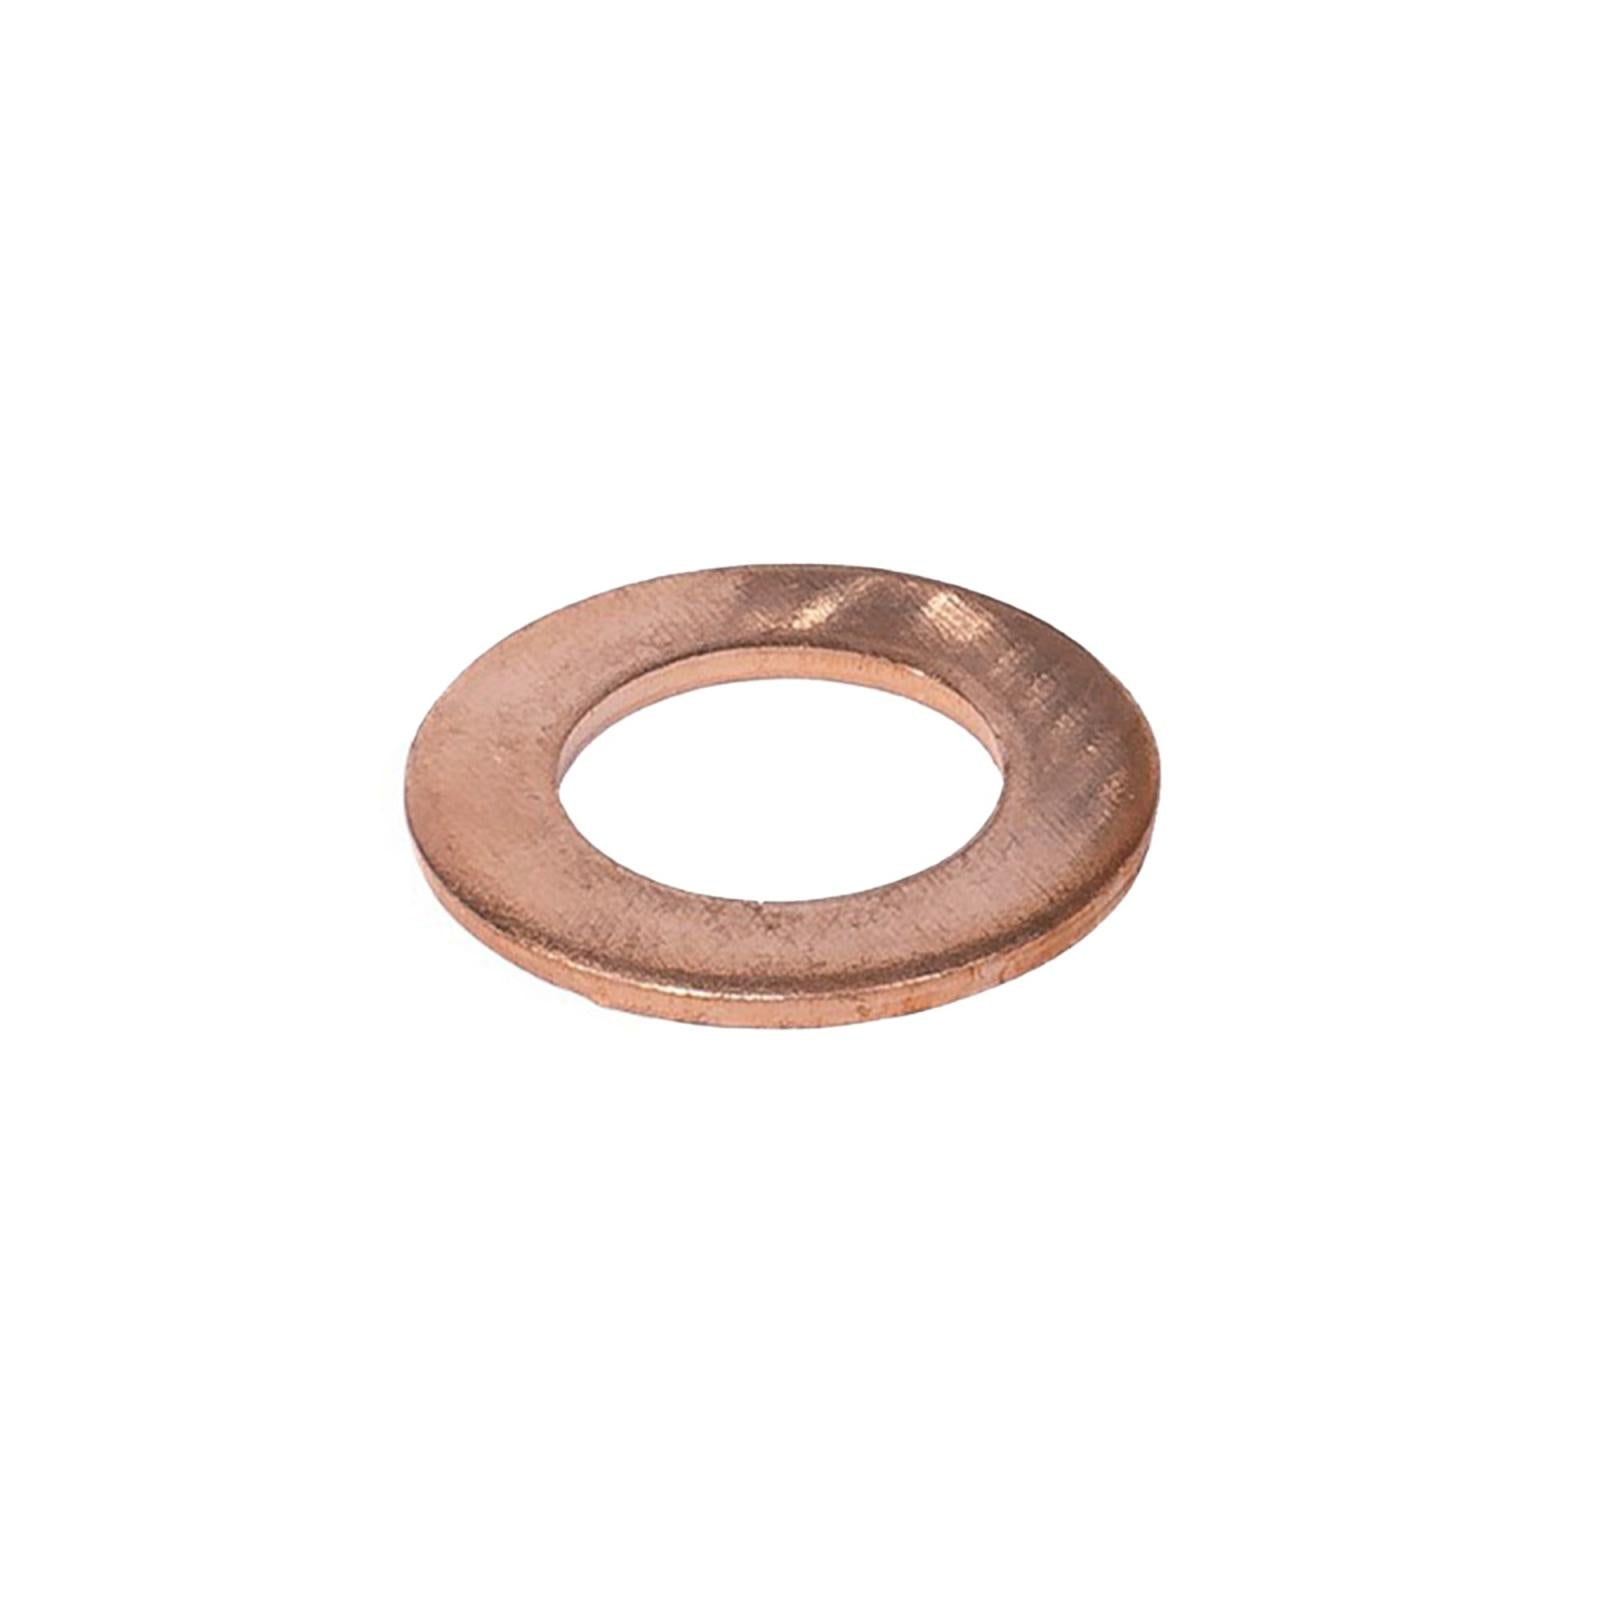 PPE Diesel Copper Washer 14mm 01-16 114052002